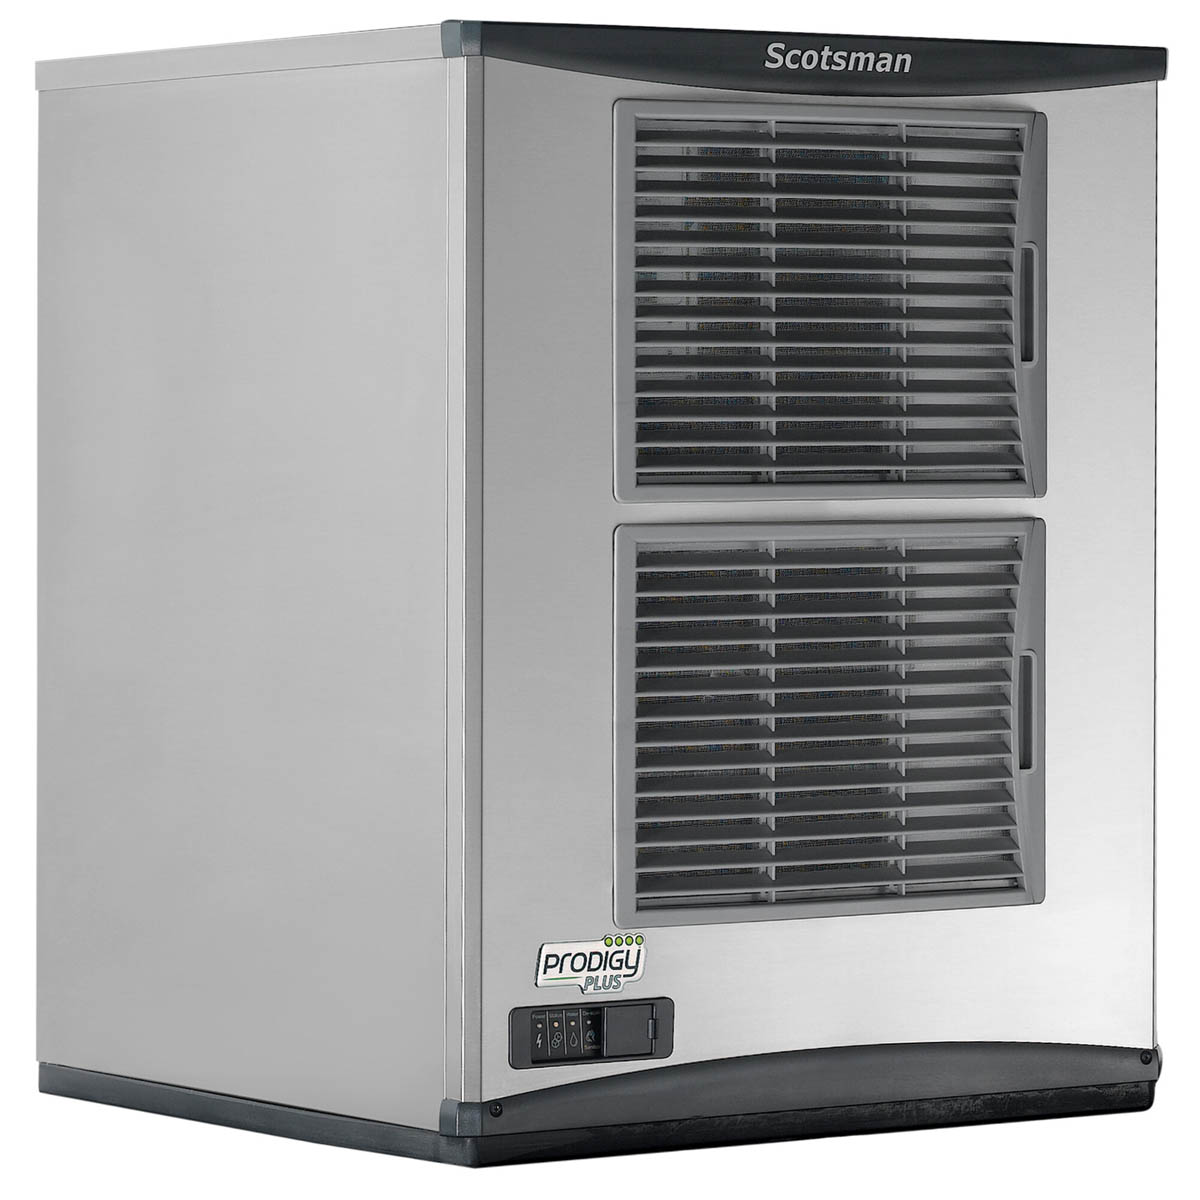 Scotsman NH1322A-32 22“ Air-Cooled Nugget-Style Ice Maker, 1186 lbs/Day